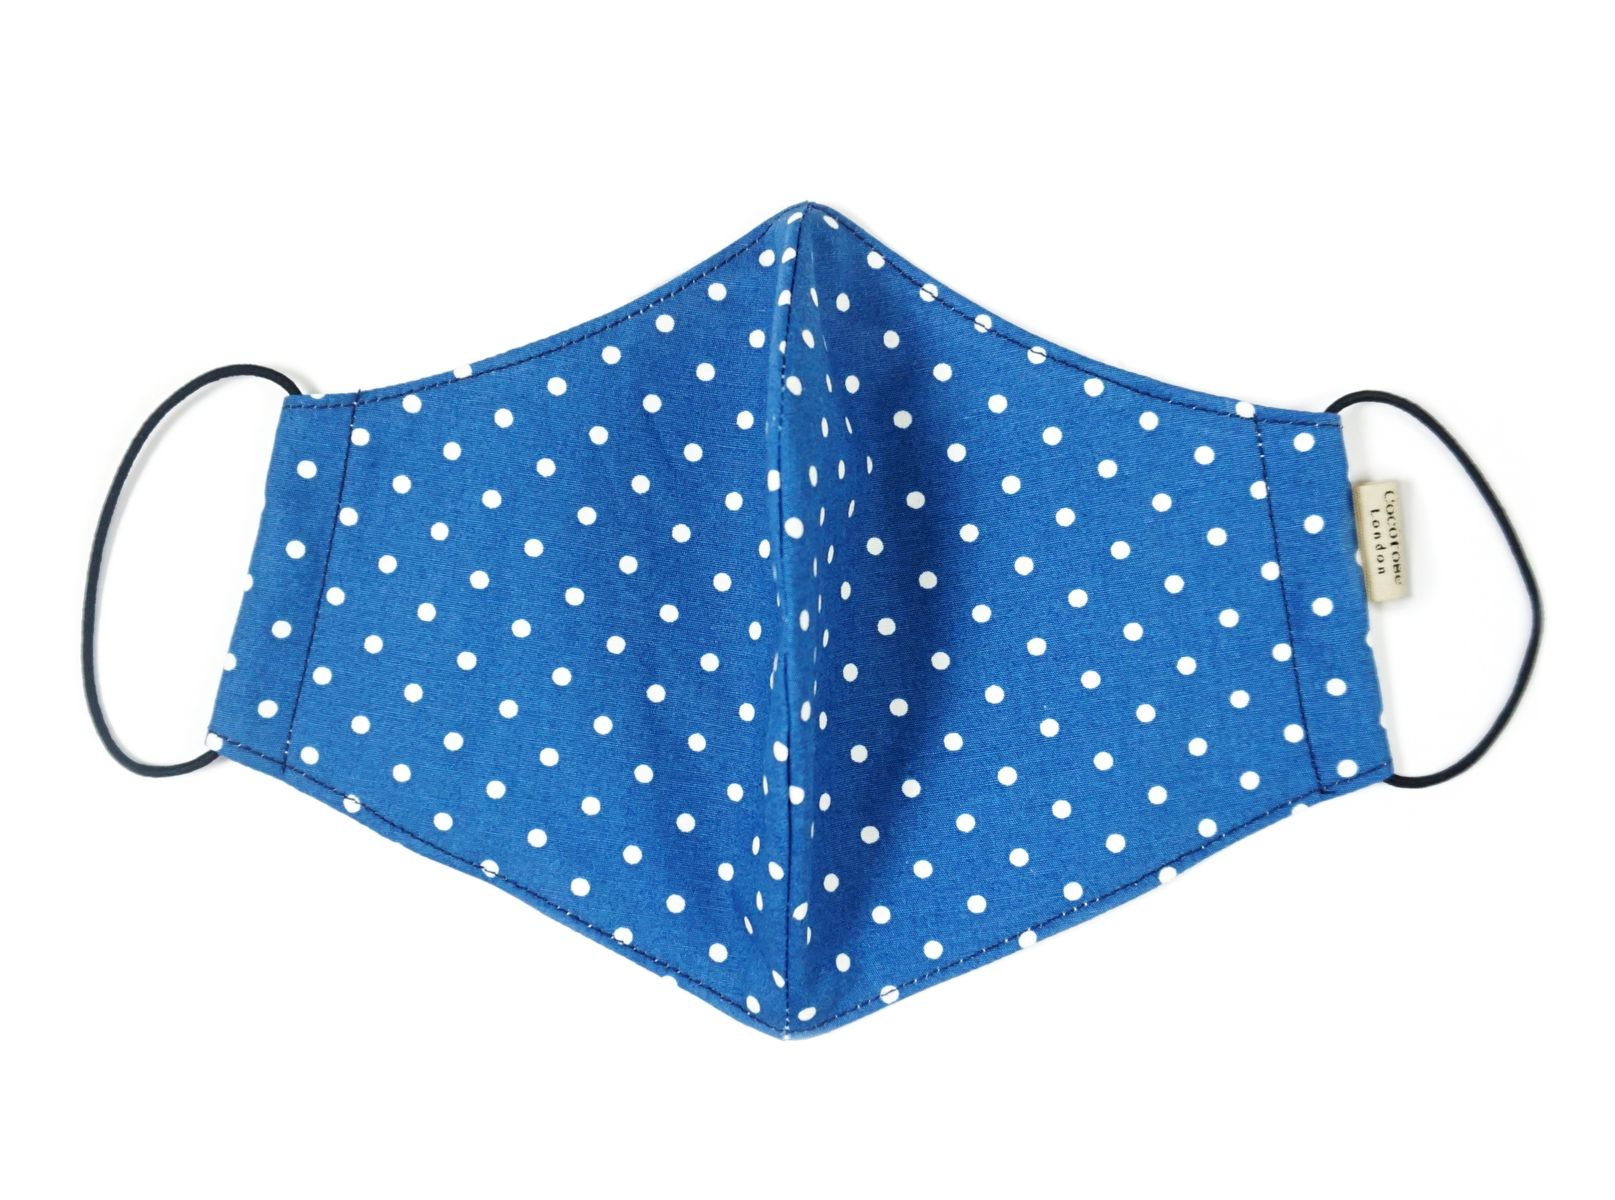 Blue polka dot cotton face mask from Cocorose London